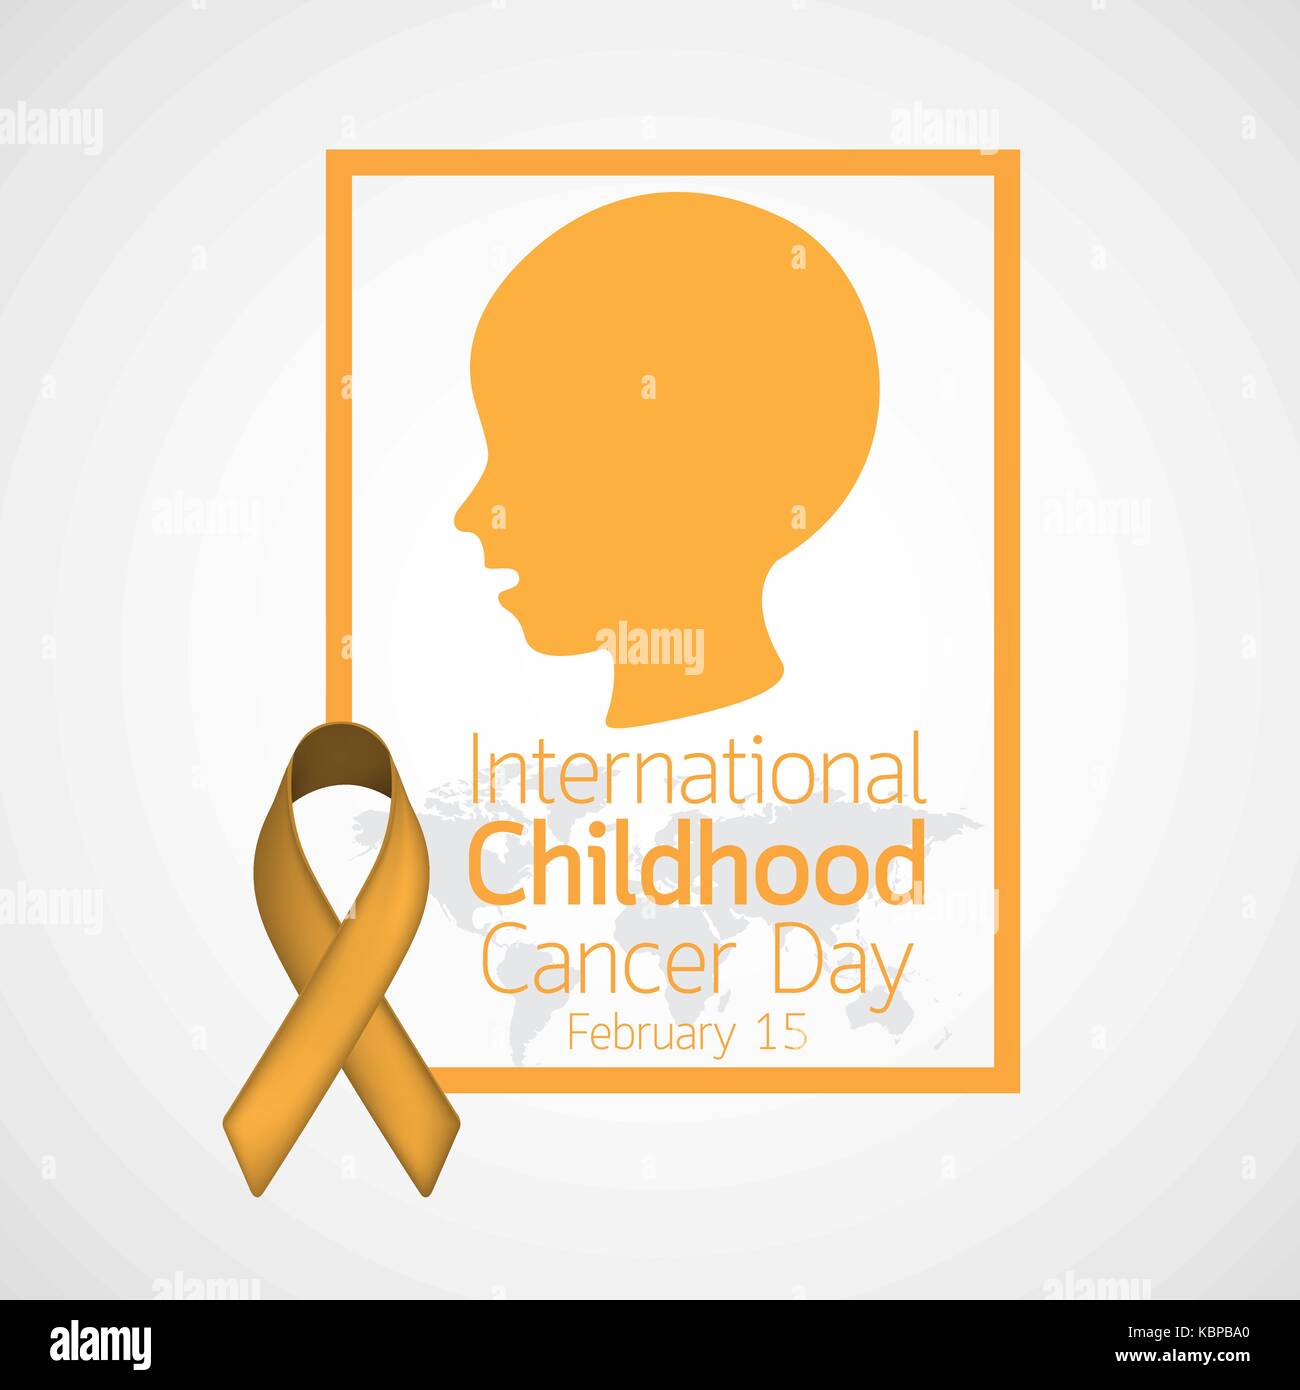 International Childhood Cancer Day vector icon illustration Stock Vector